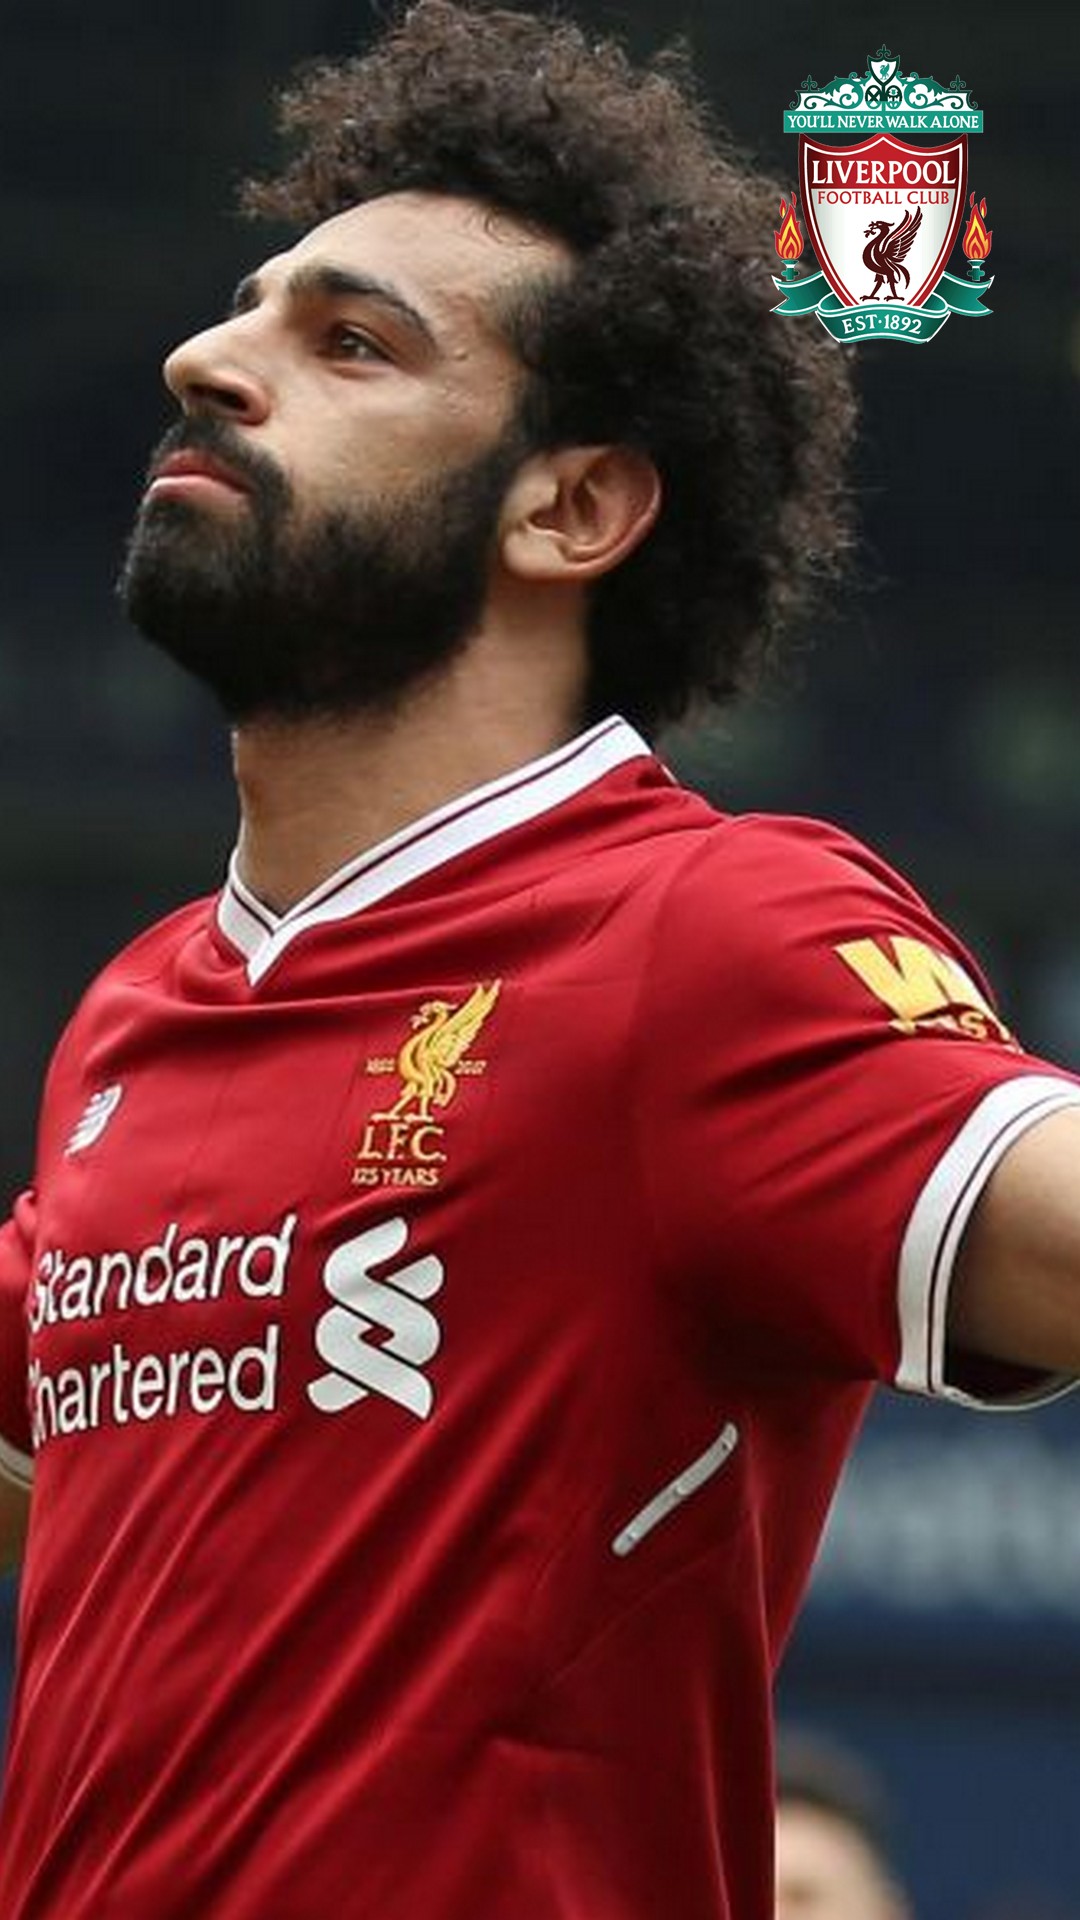 Mohamed Salah Pictures Wallpaper iPhone with resolution 1080X1920 pixel. You can make this wallpaper for your iPhone 5, 6, 7, 8, X backgrounds, Mobile Screensaver, or iPad Lock Screen